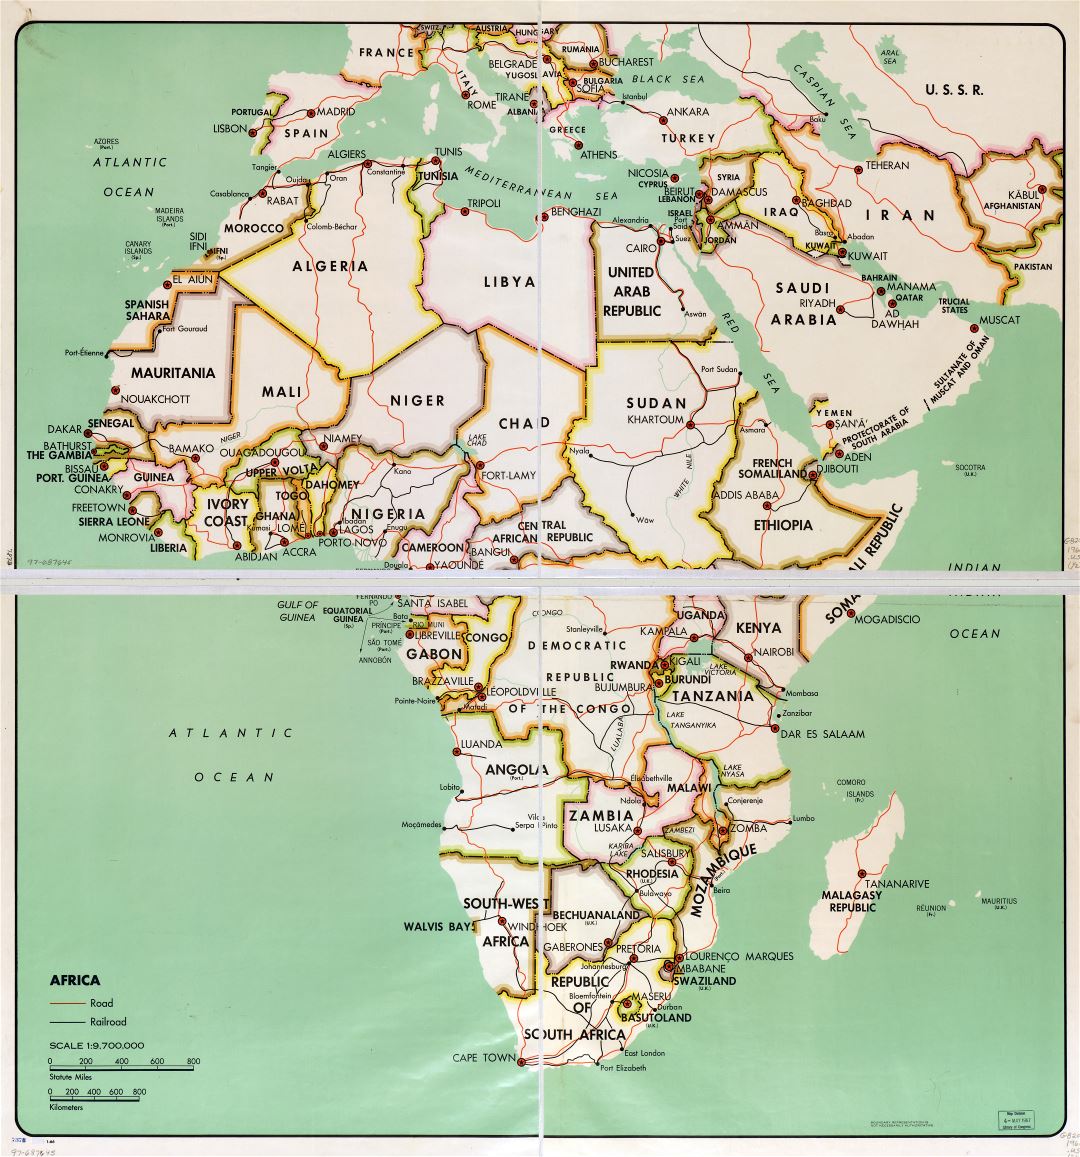 In high resolution detail political map of Africa with the marks of capital cities, large cities, major roads, railroads and names of countries - 1966